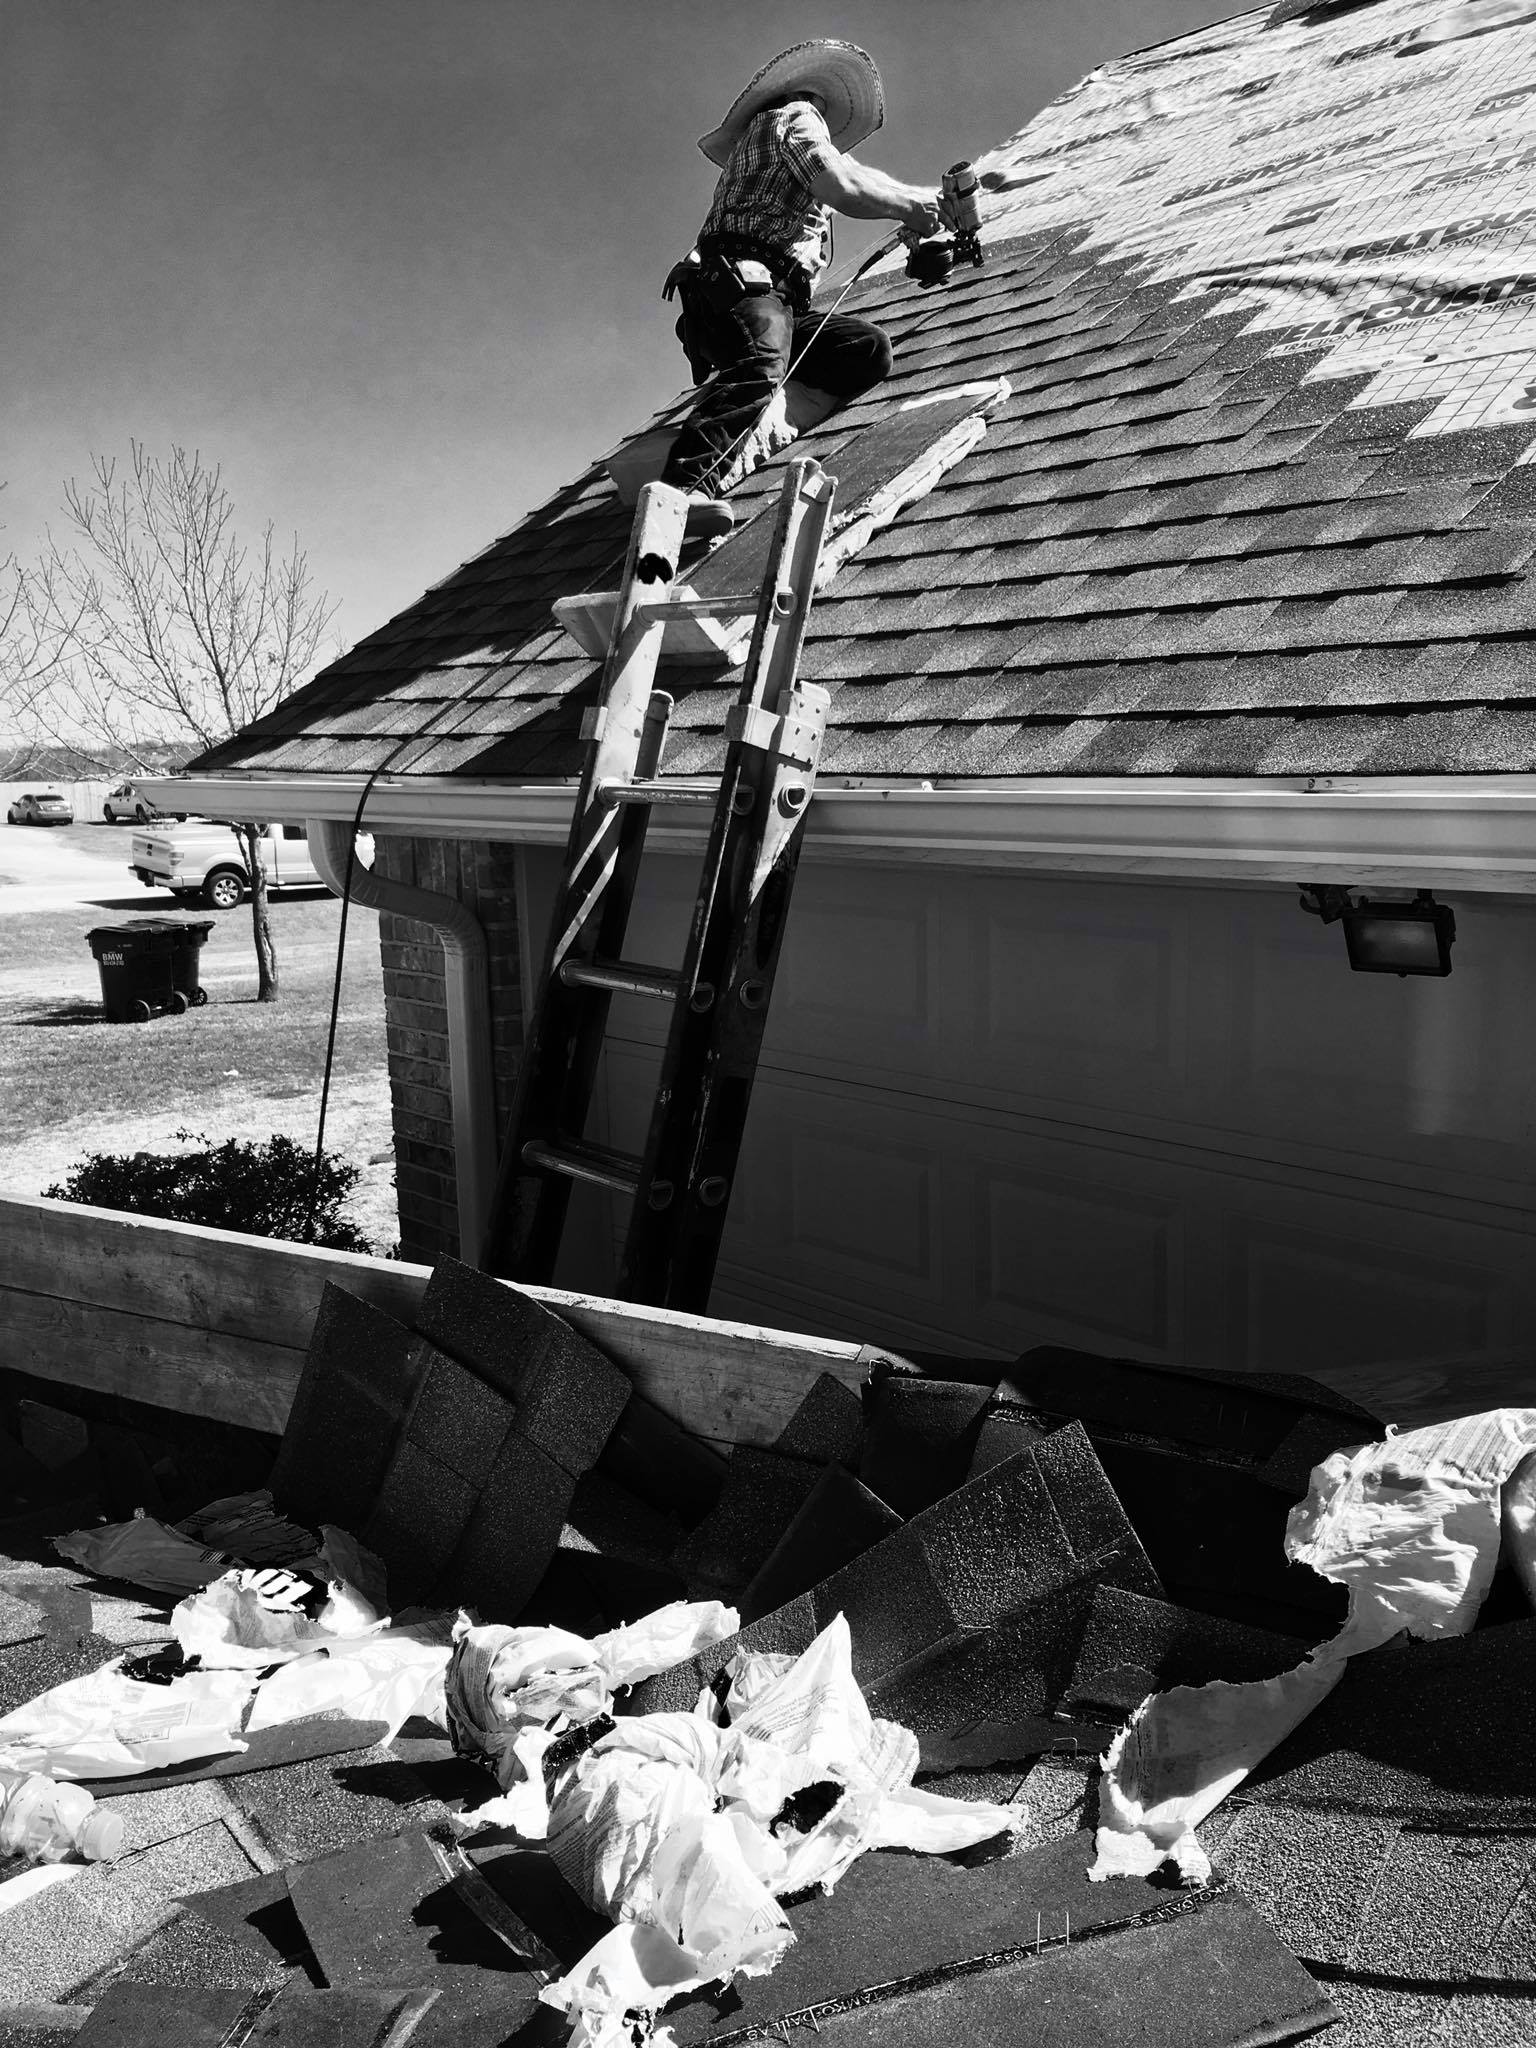 Crew member on ladder during roof installation installing shingles with a nailgun